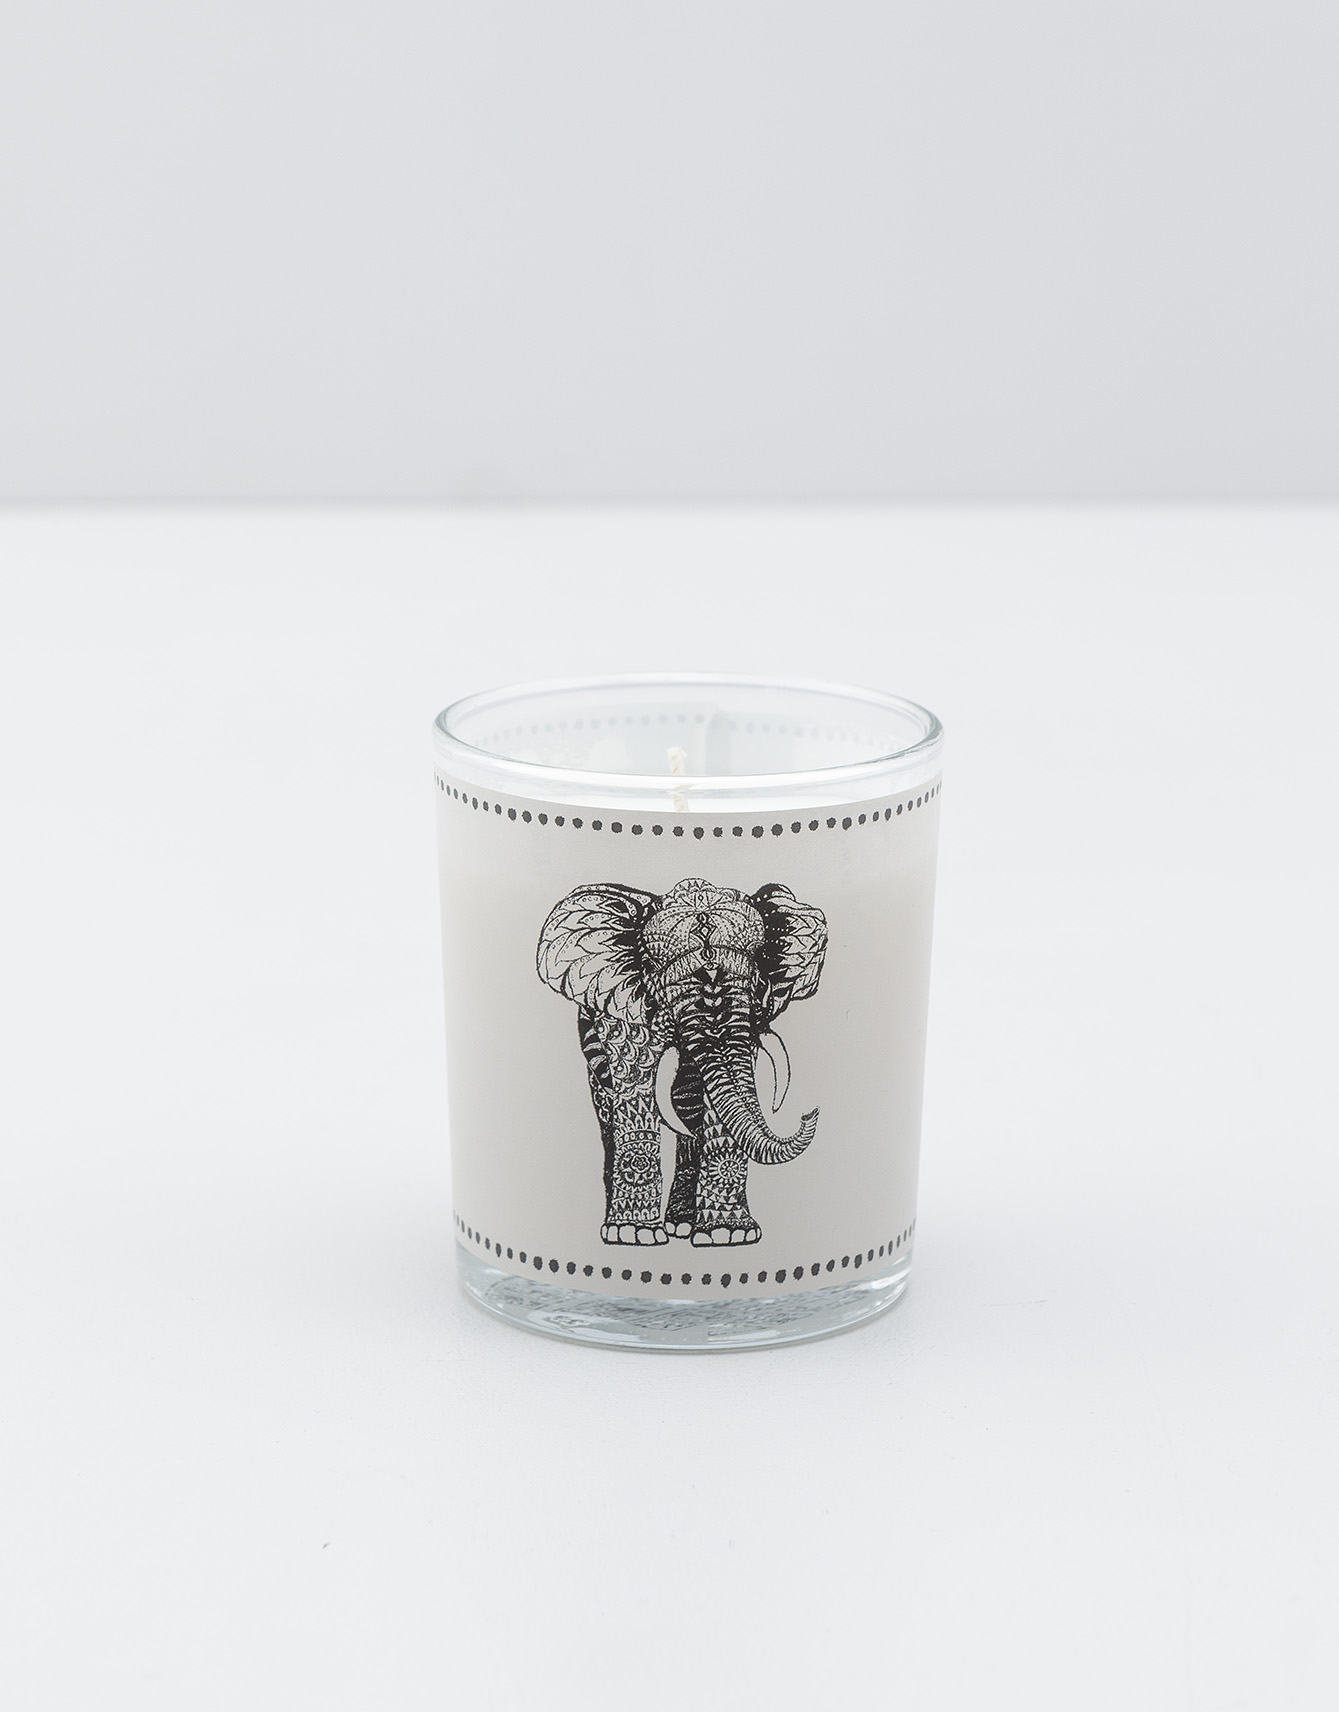 Scented candle Image 0